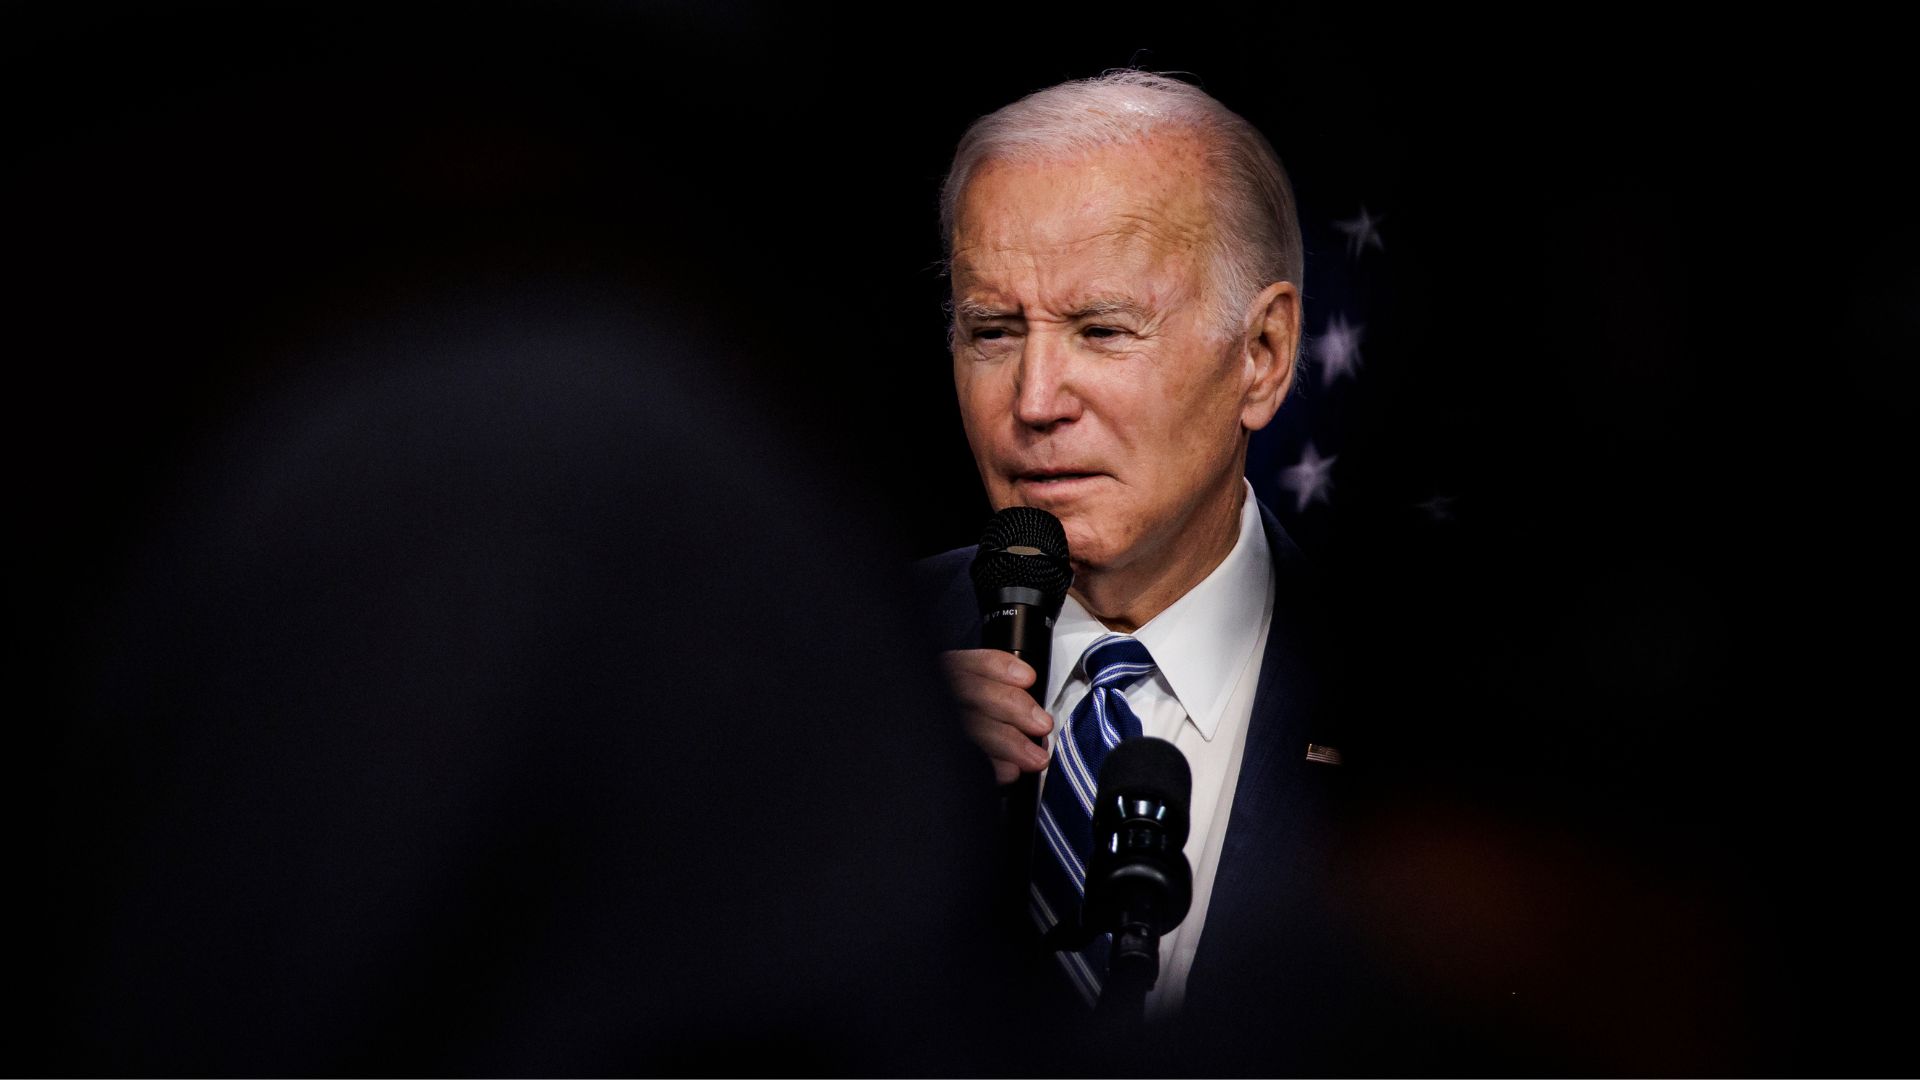 federal-judge-takes-sledgehammer-to-biden’s-student-debt-amnesty-—-but-do-democrats-even-care?